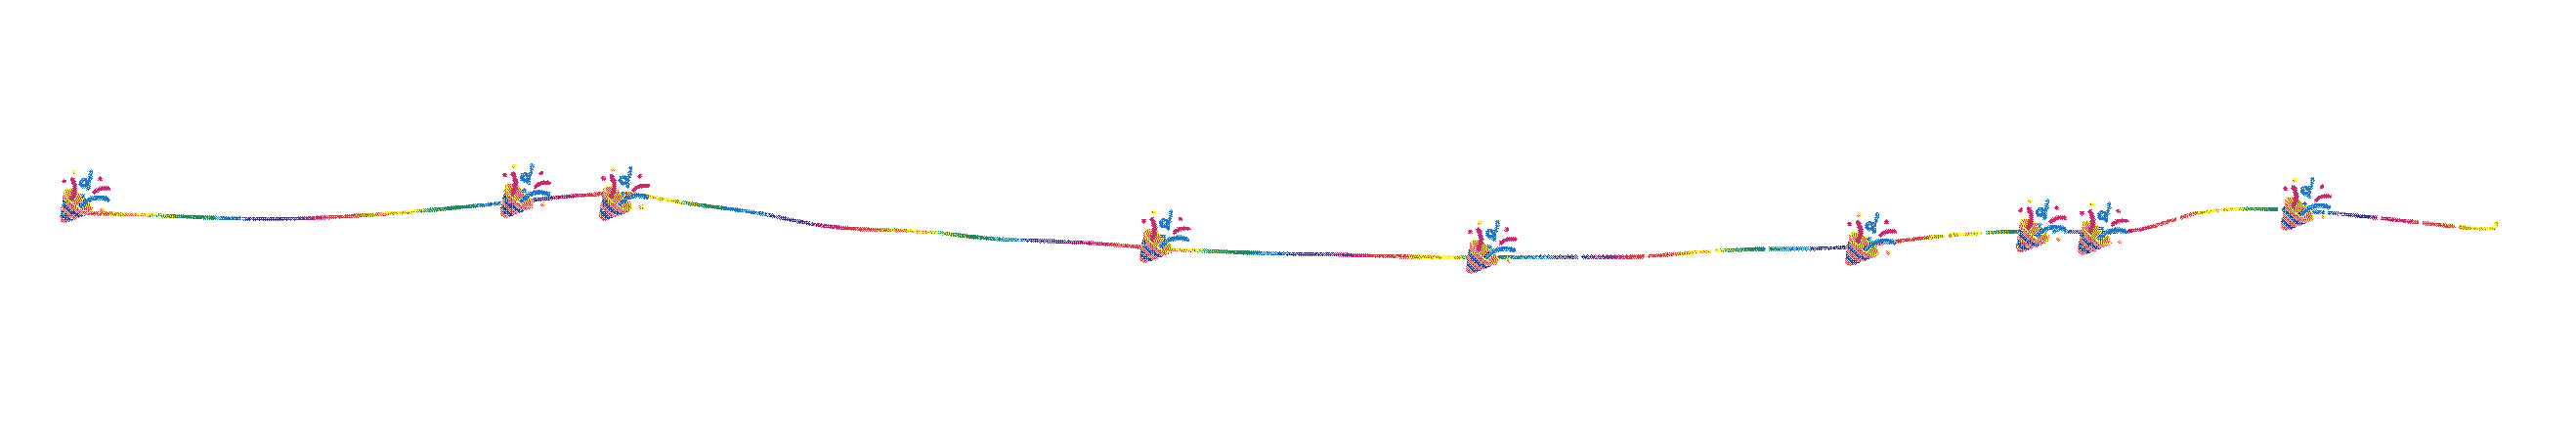 A drawn rainbow line with periodic little eraser lines through it and party emojis spread along its length.